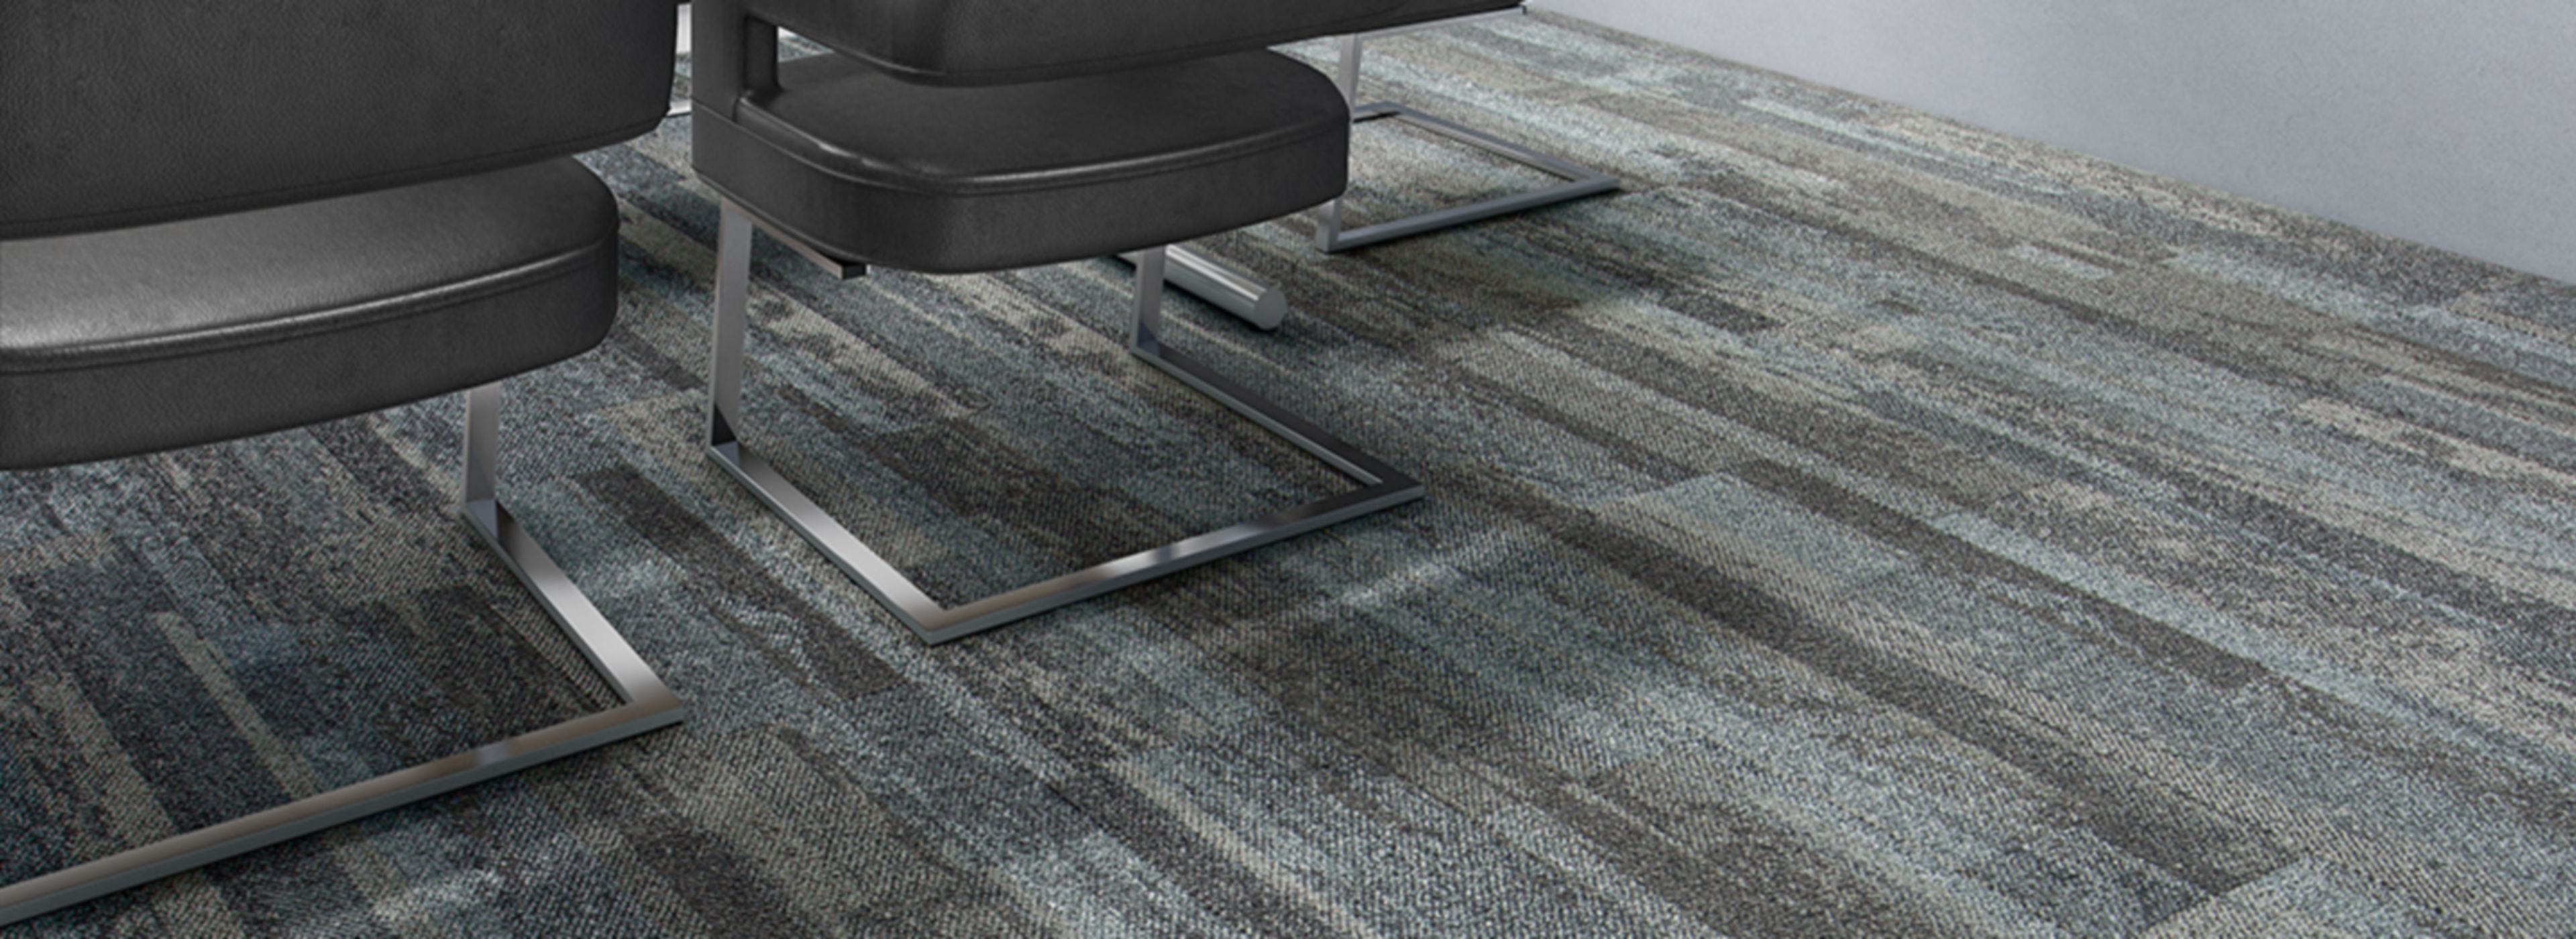 Interface Naturally Weathered plank carpet tile in office meeting room with reflection of natural light through windows numéro d’image 1